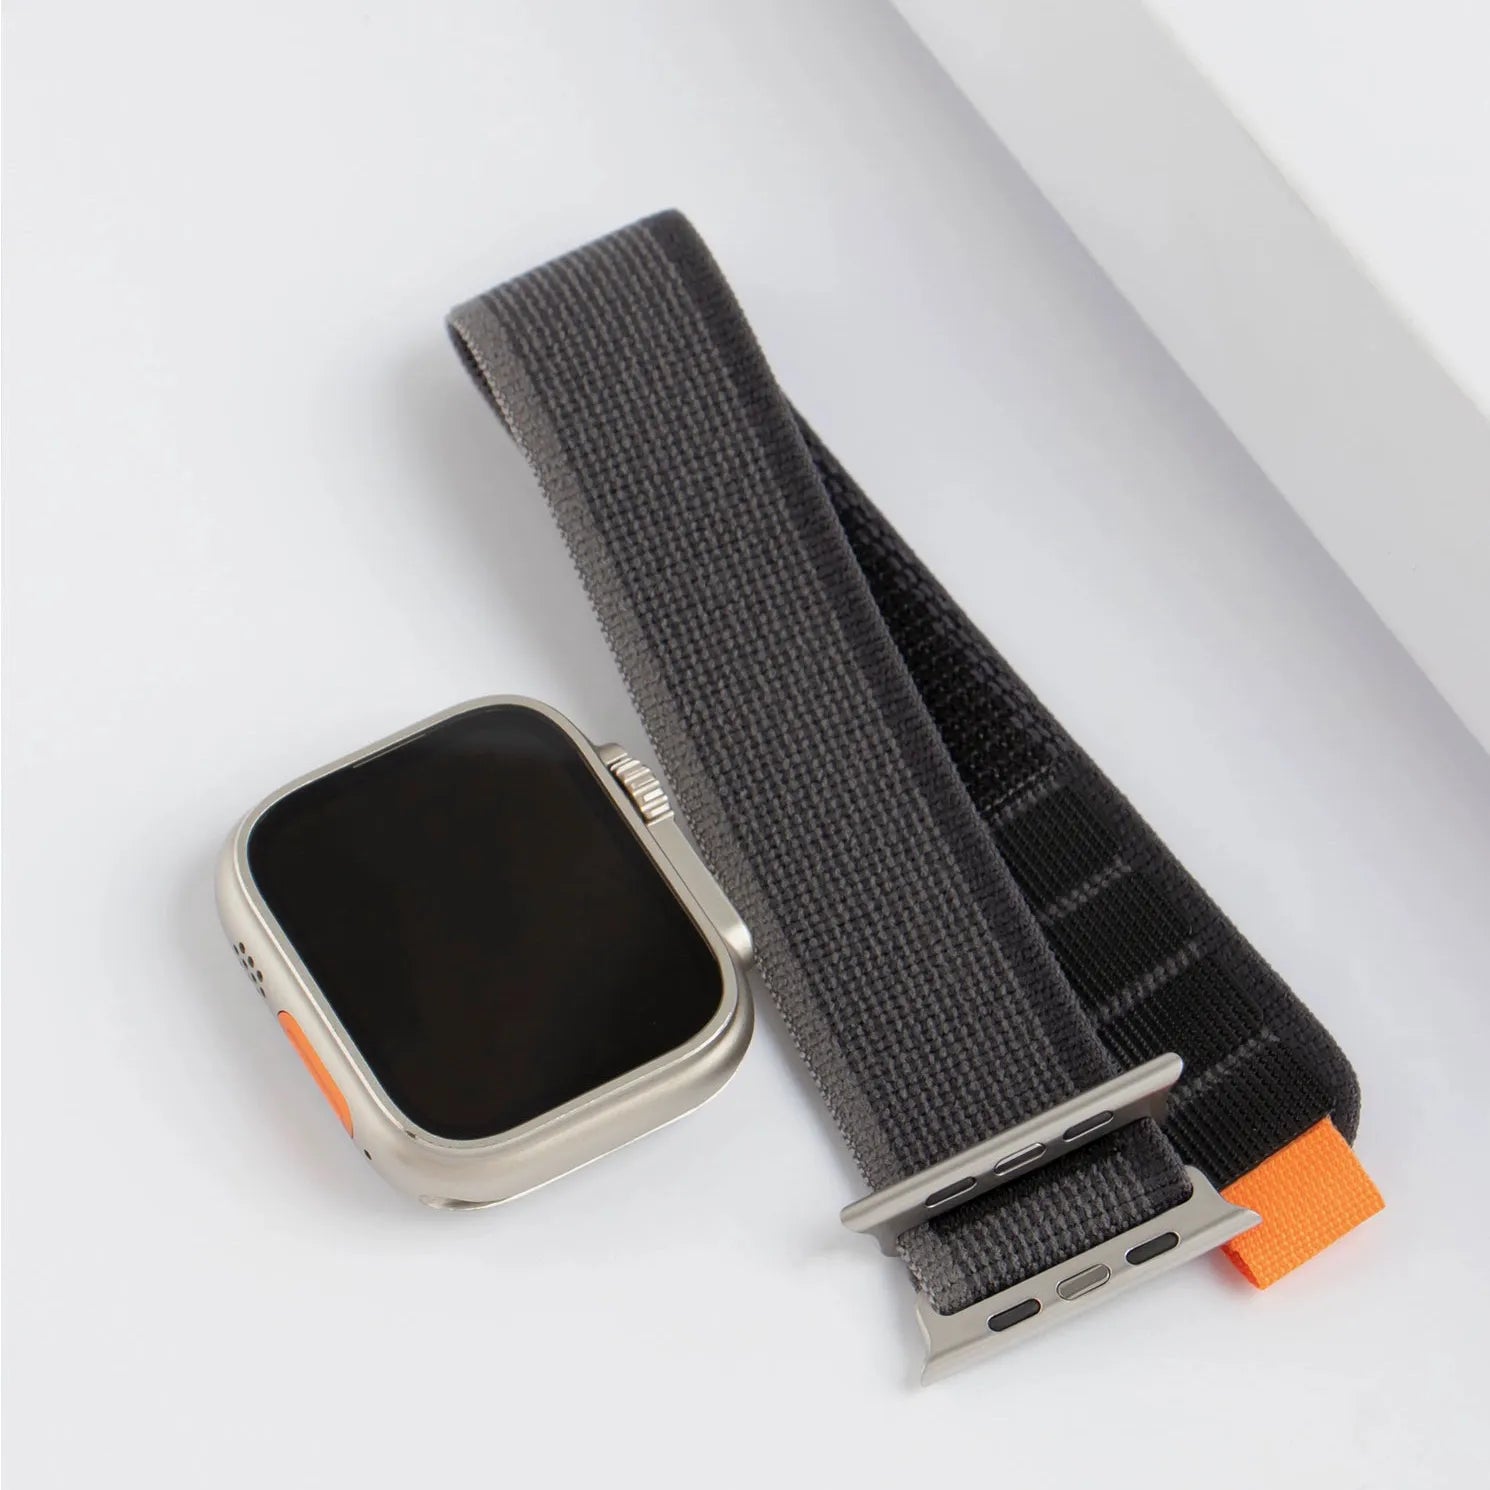 Every Apple Watch Band Compared